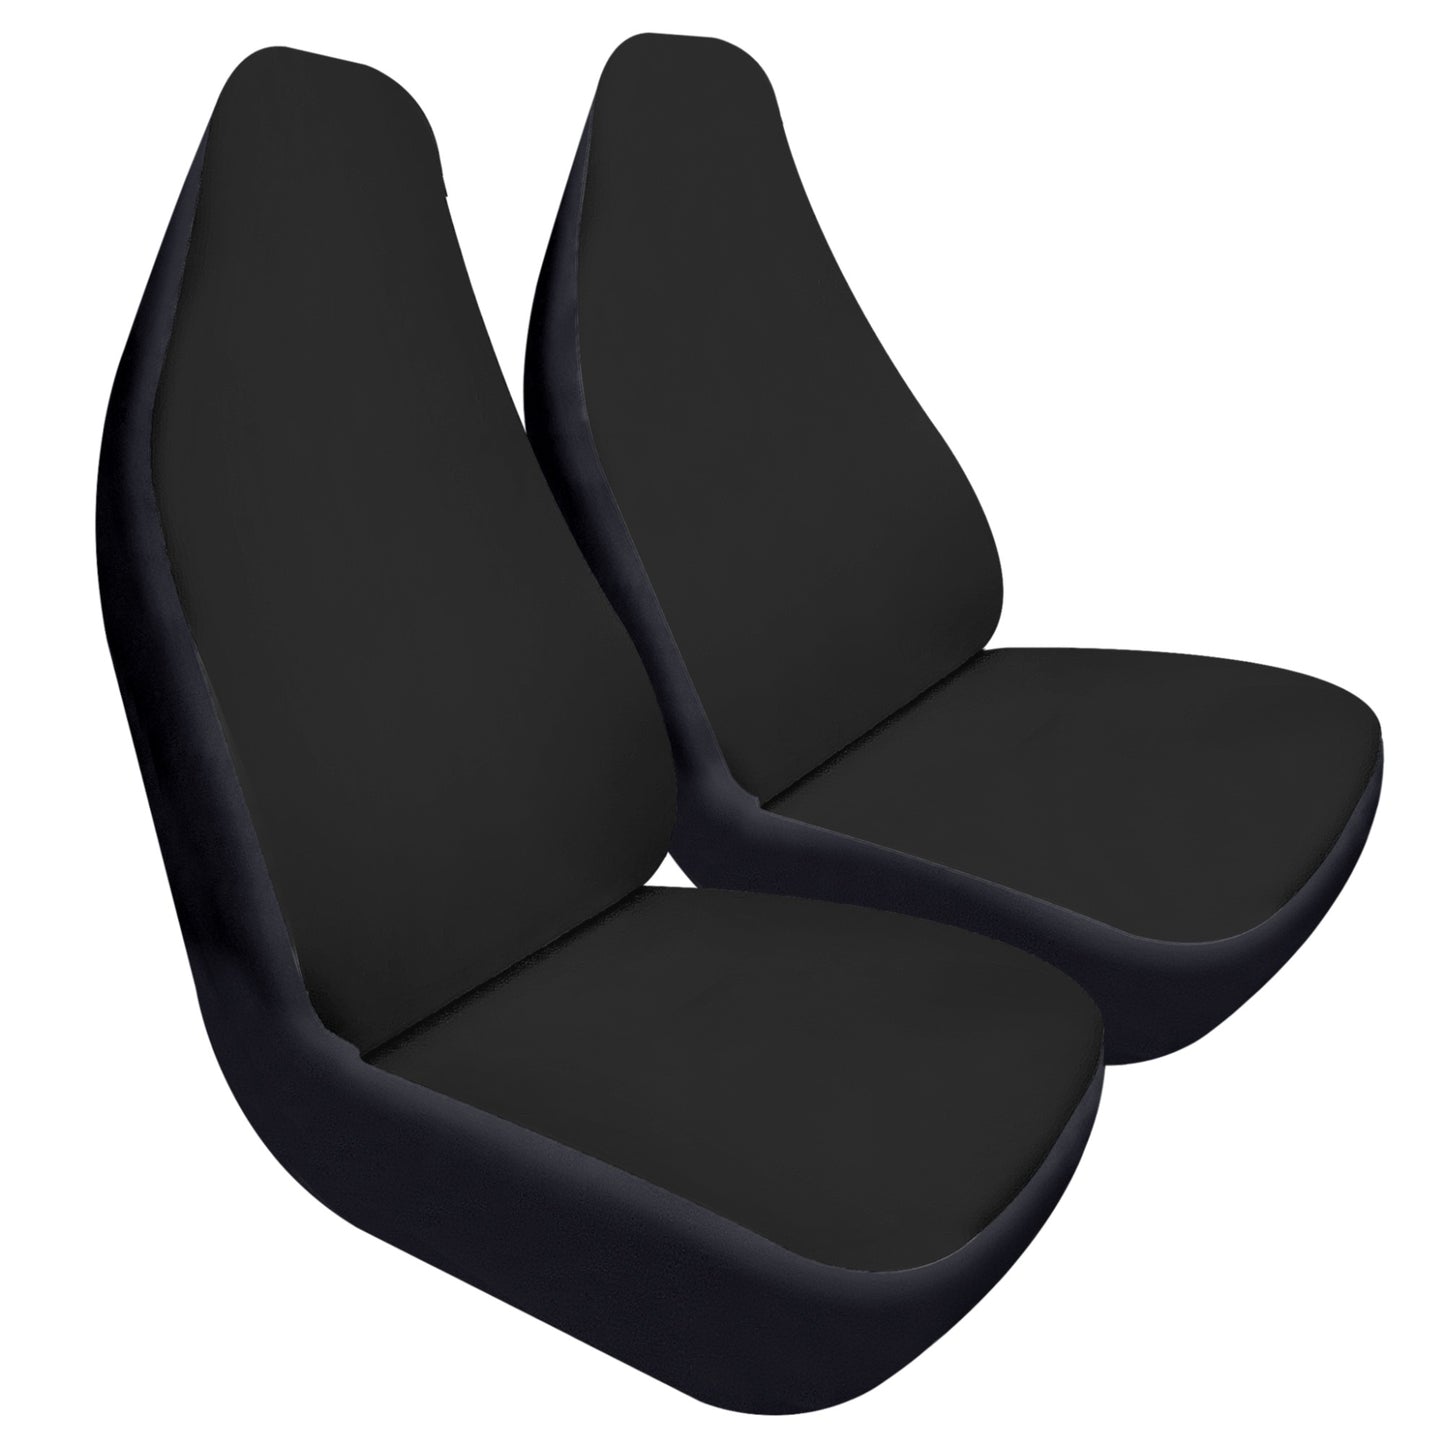 ShitHot Customizable Front Car Seat Covers - Black